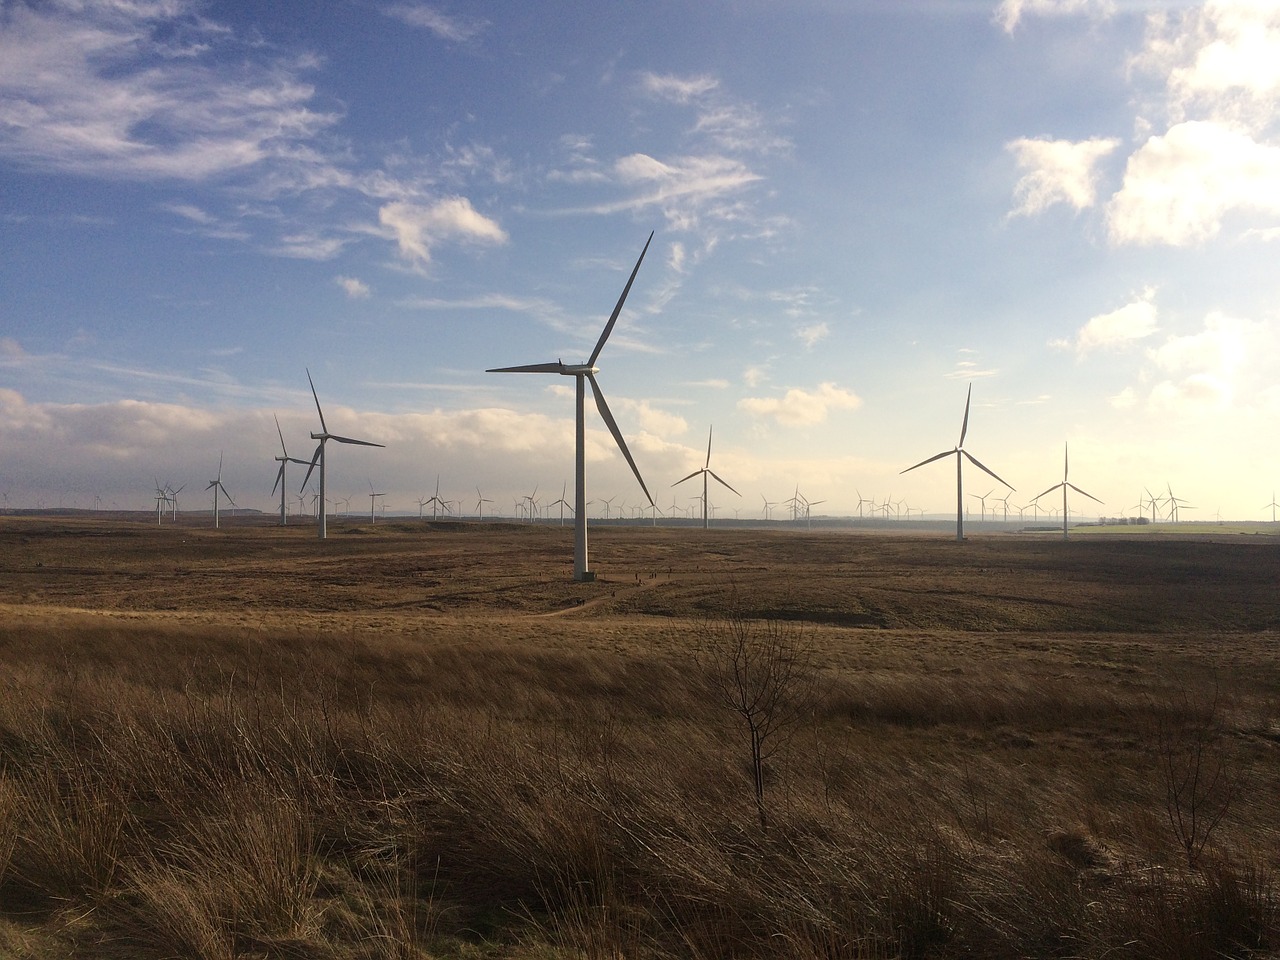 New figures reveal extent of Scotland's renewable energy jobs and investment